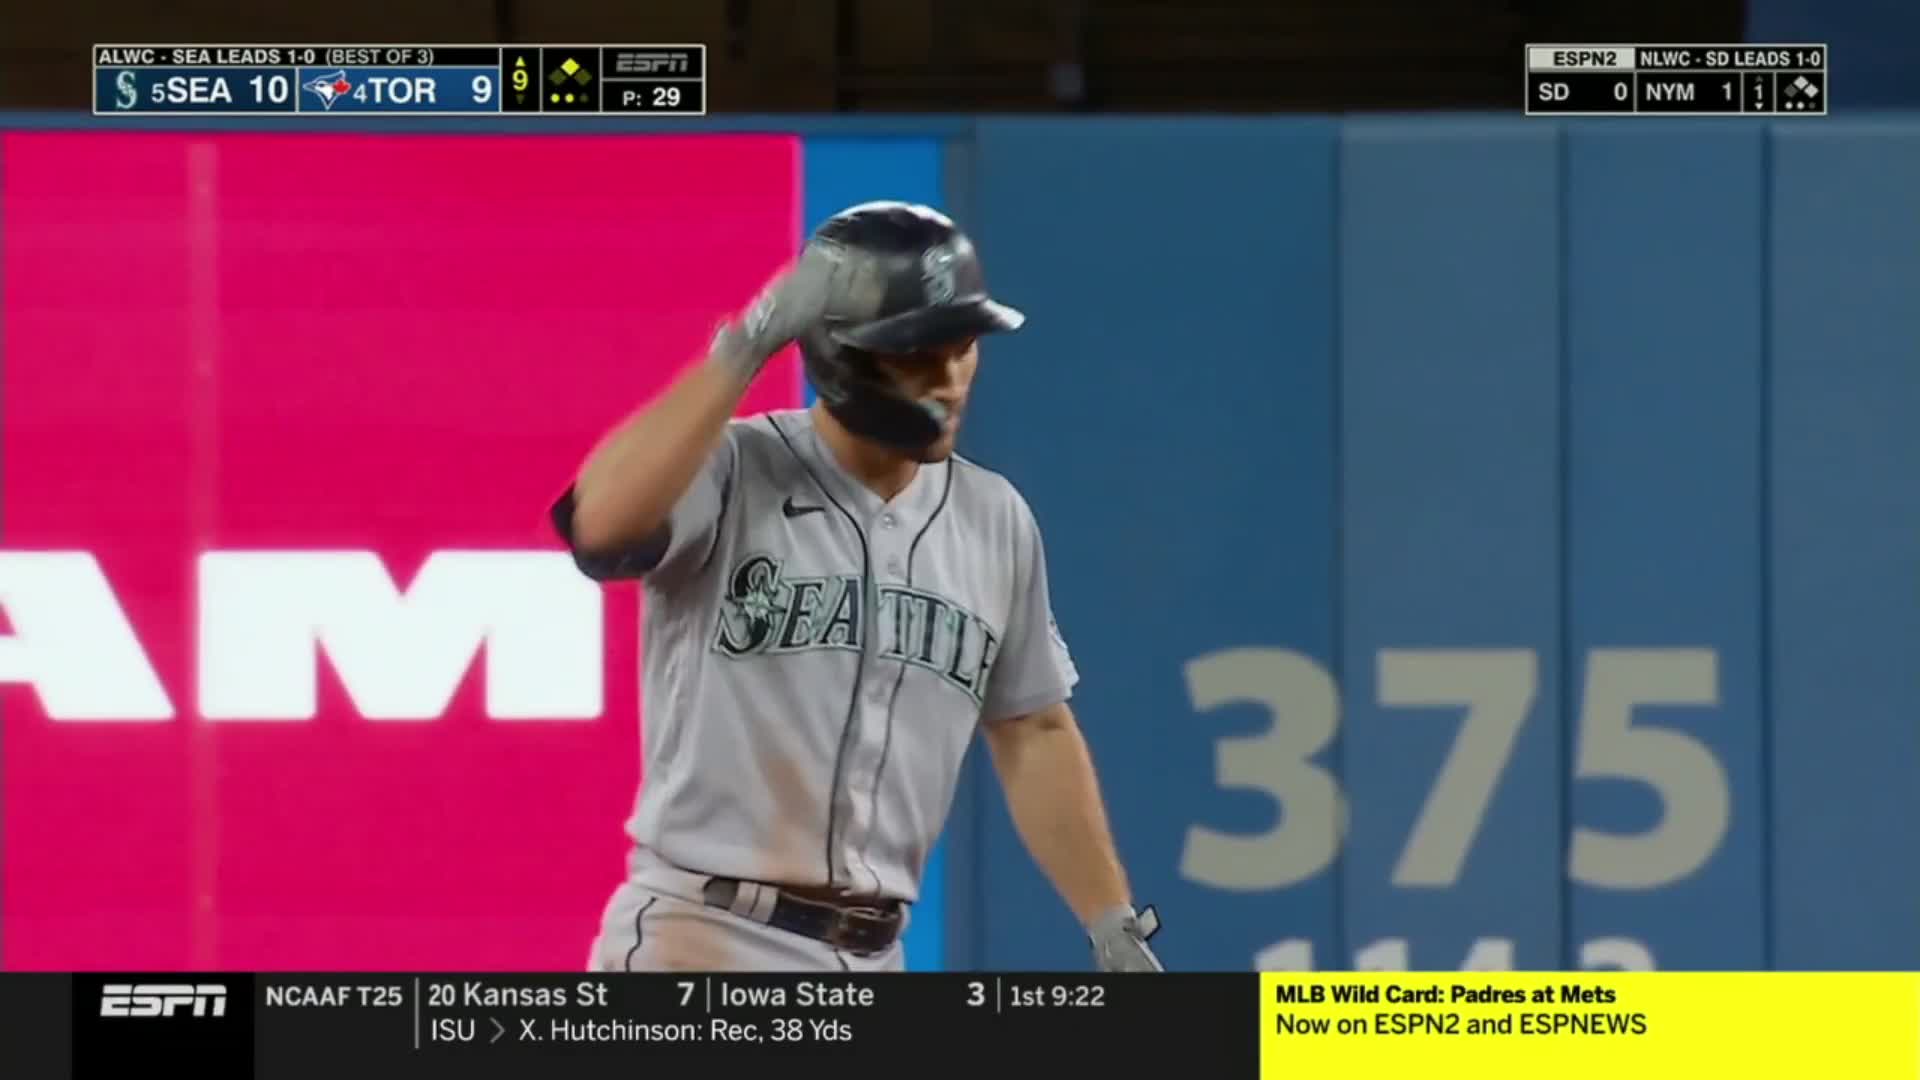 Adam Frazier gives the Mariners the lead with an RBI double in the